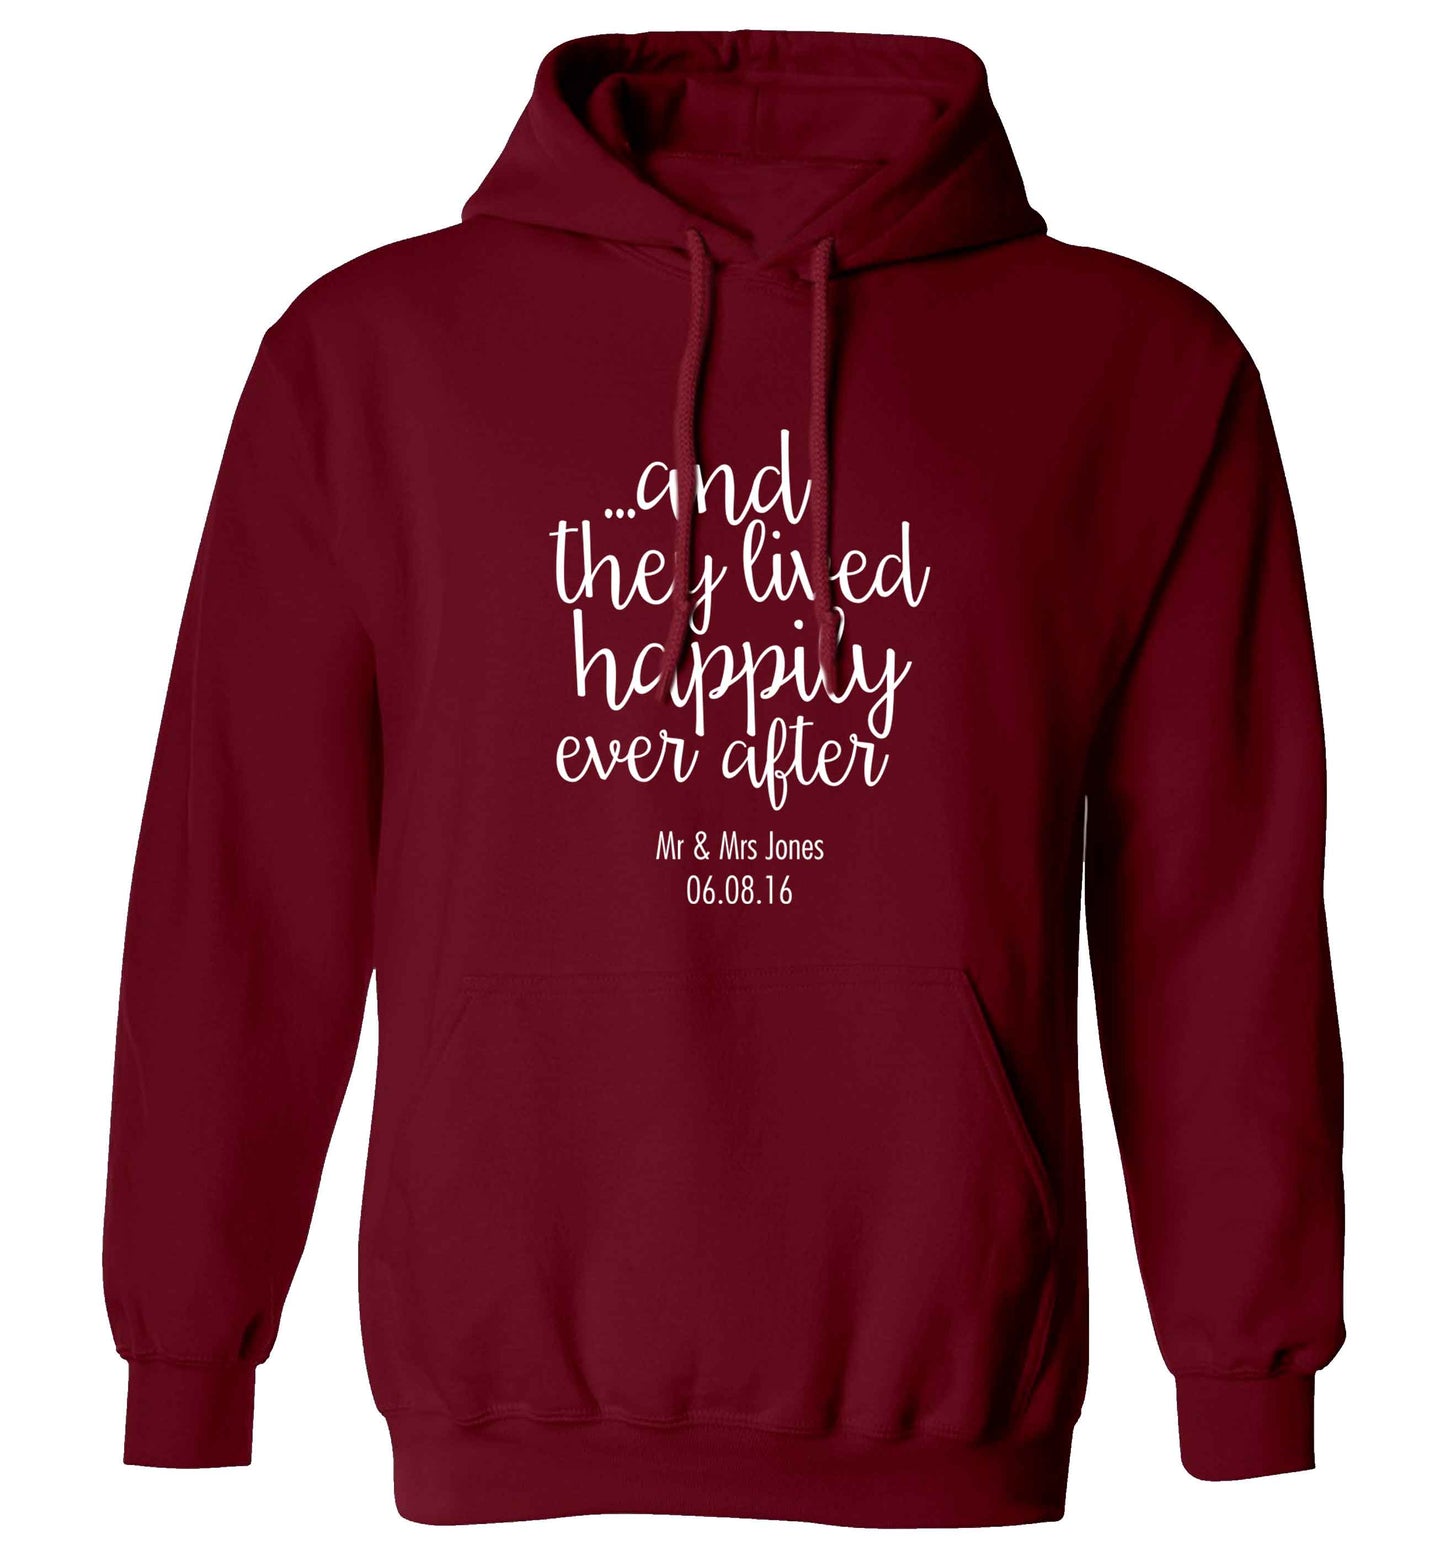 ...and they lived happily ever after - personalised date and names adults unisex maroon hoodie 2XL